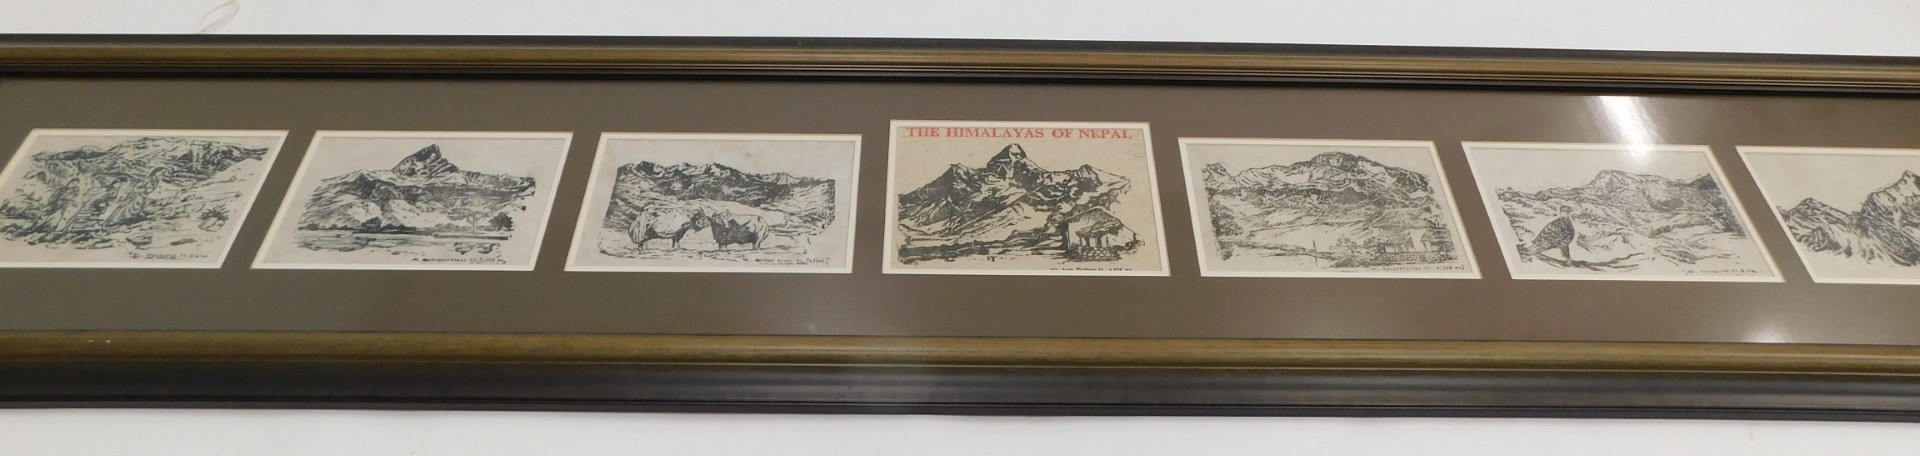 A set of seven monochrome engravings, each of scenes from the Himalayan Mountains, central print tit - Image 3 of 5